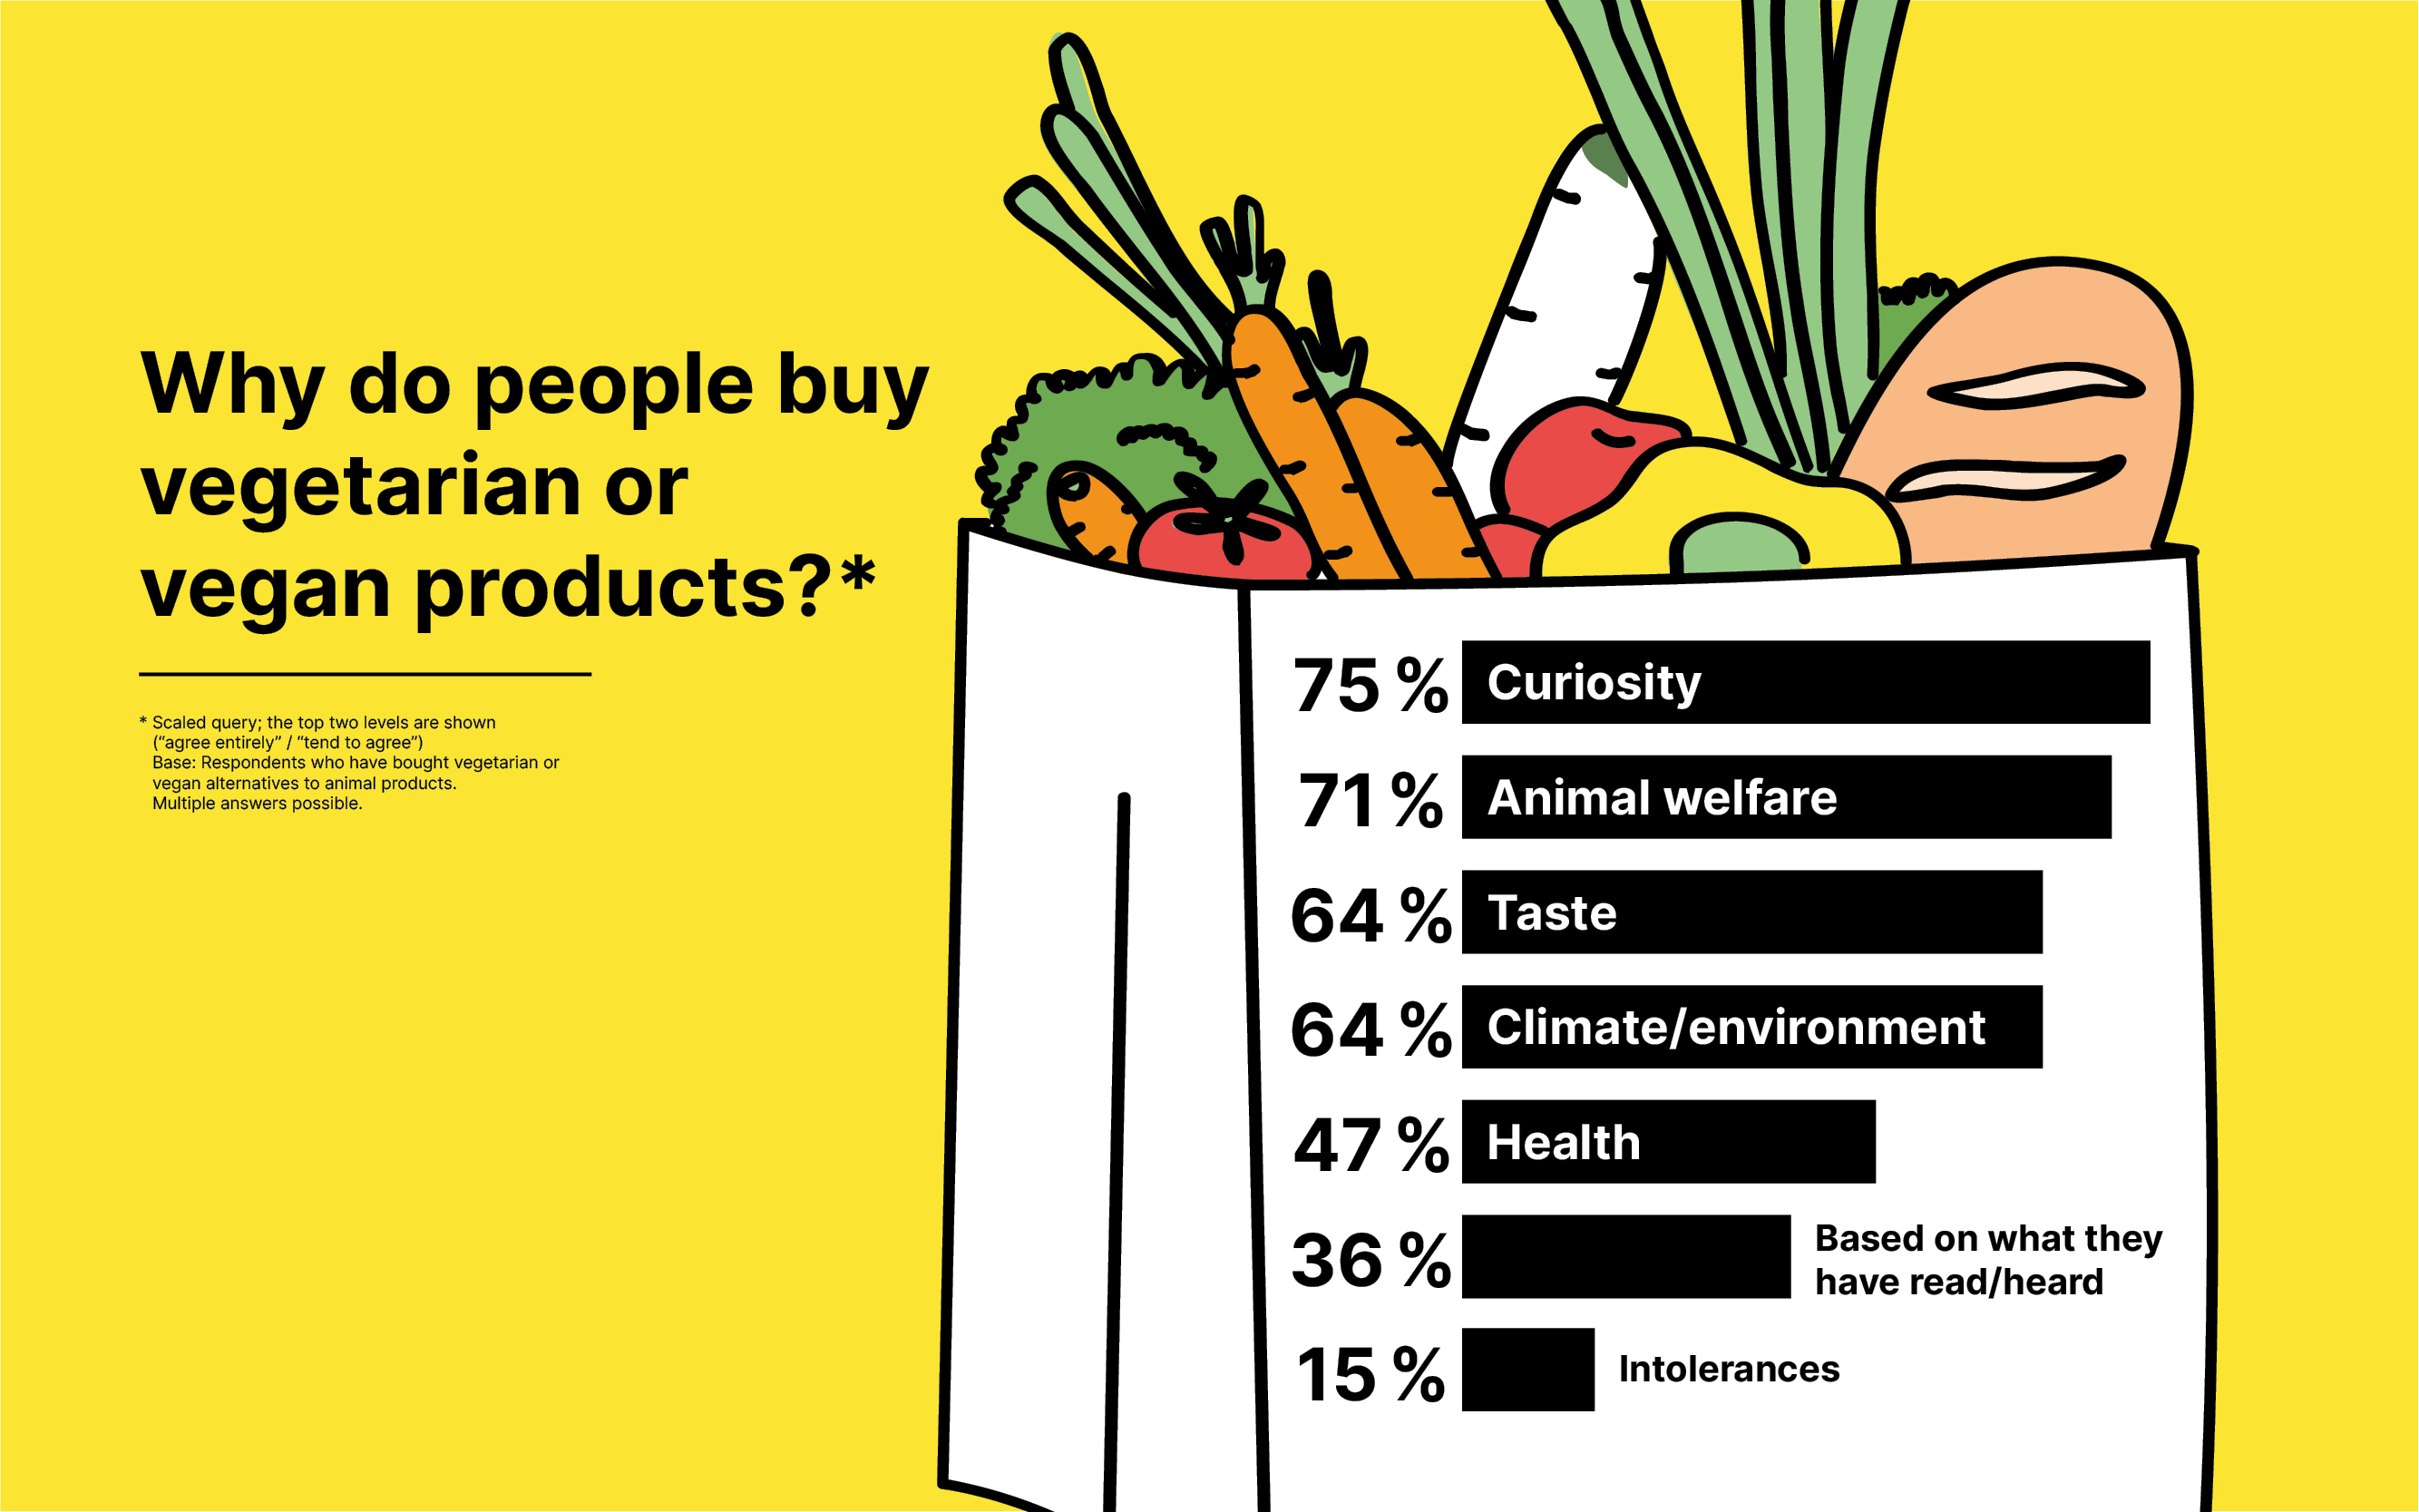 Why do people buy vegetarian or vegan products?